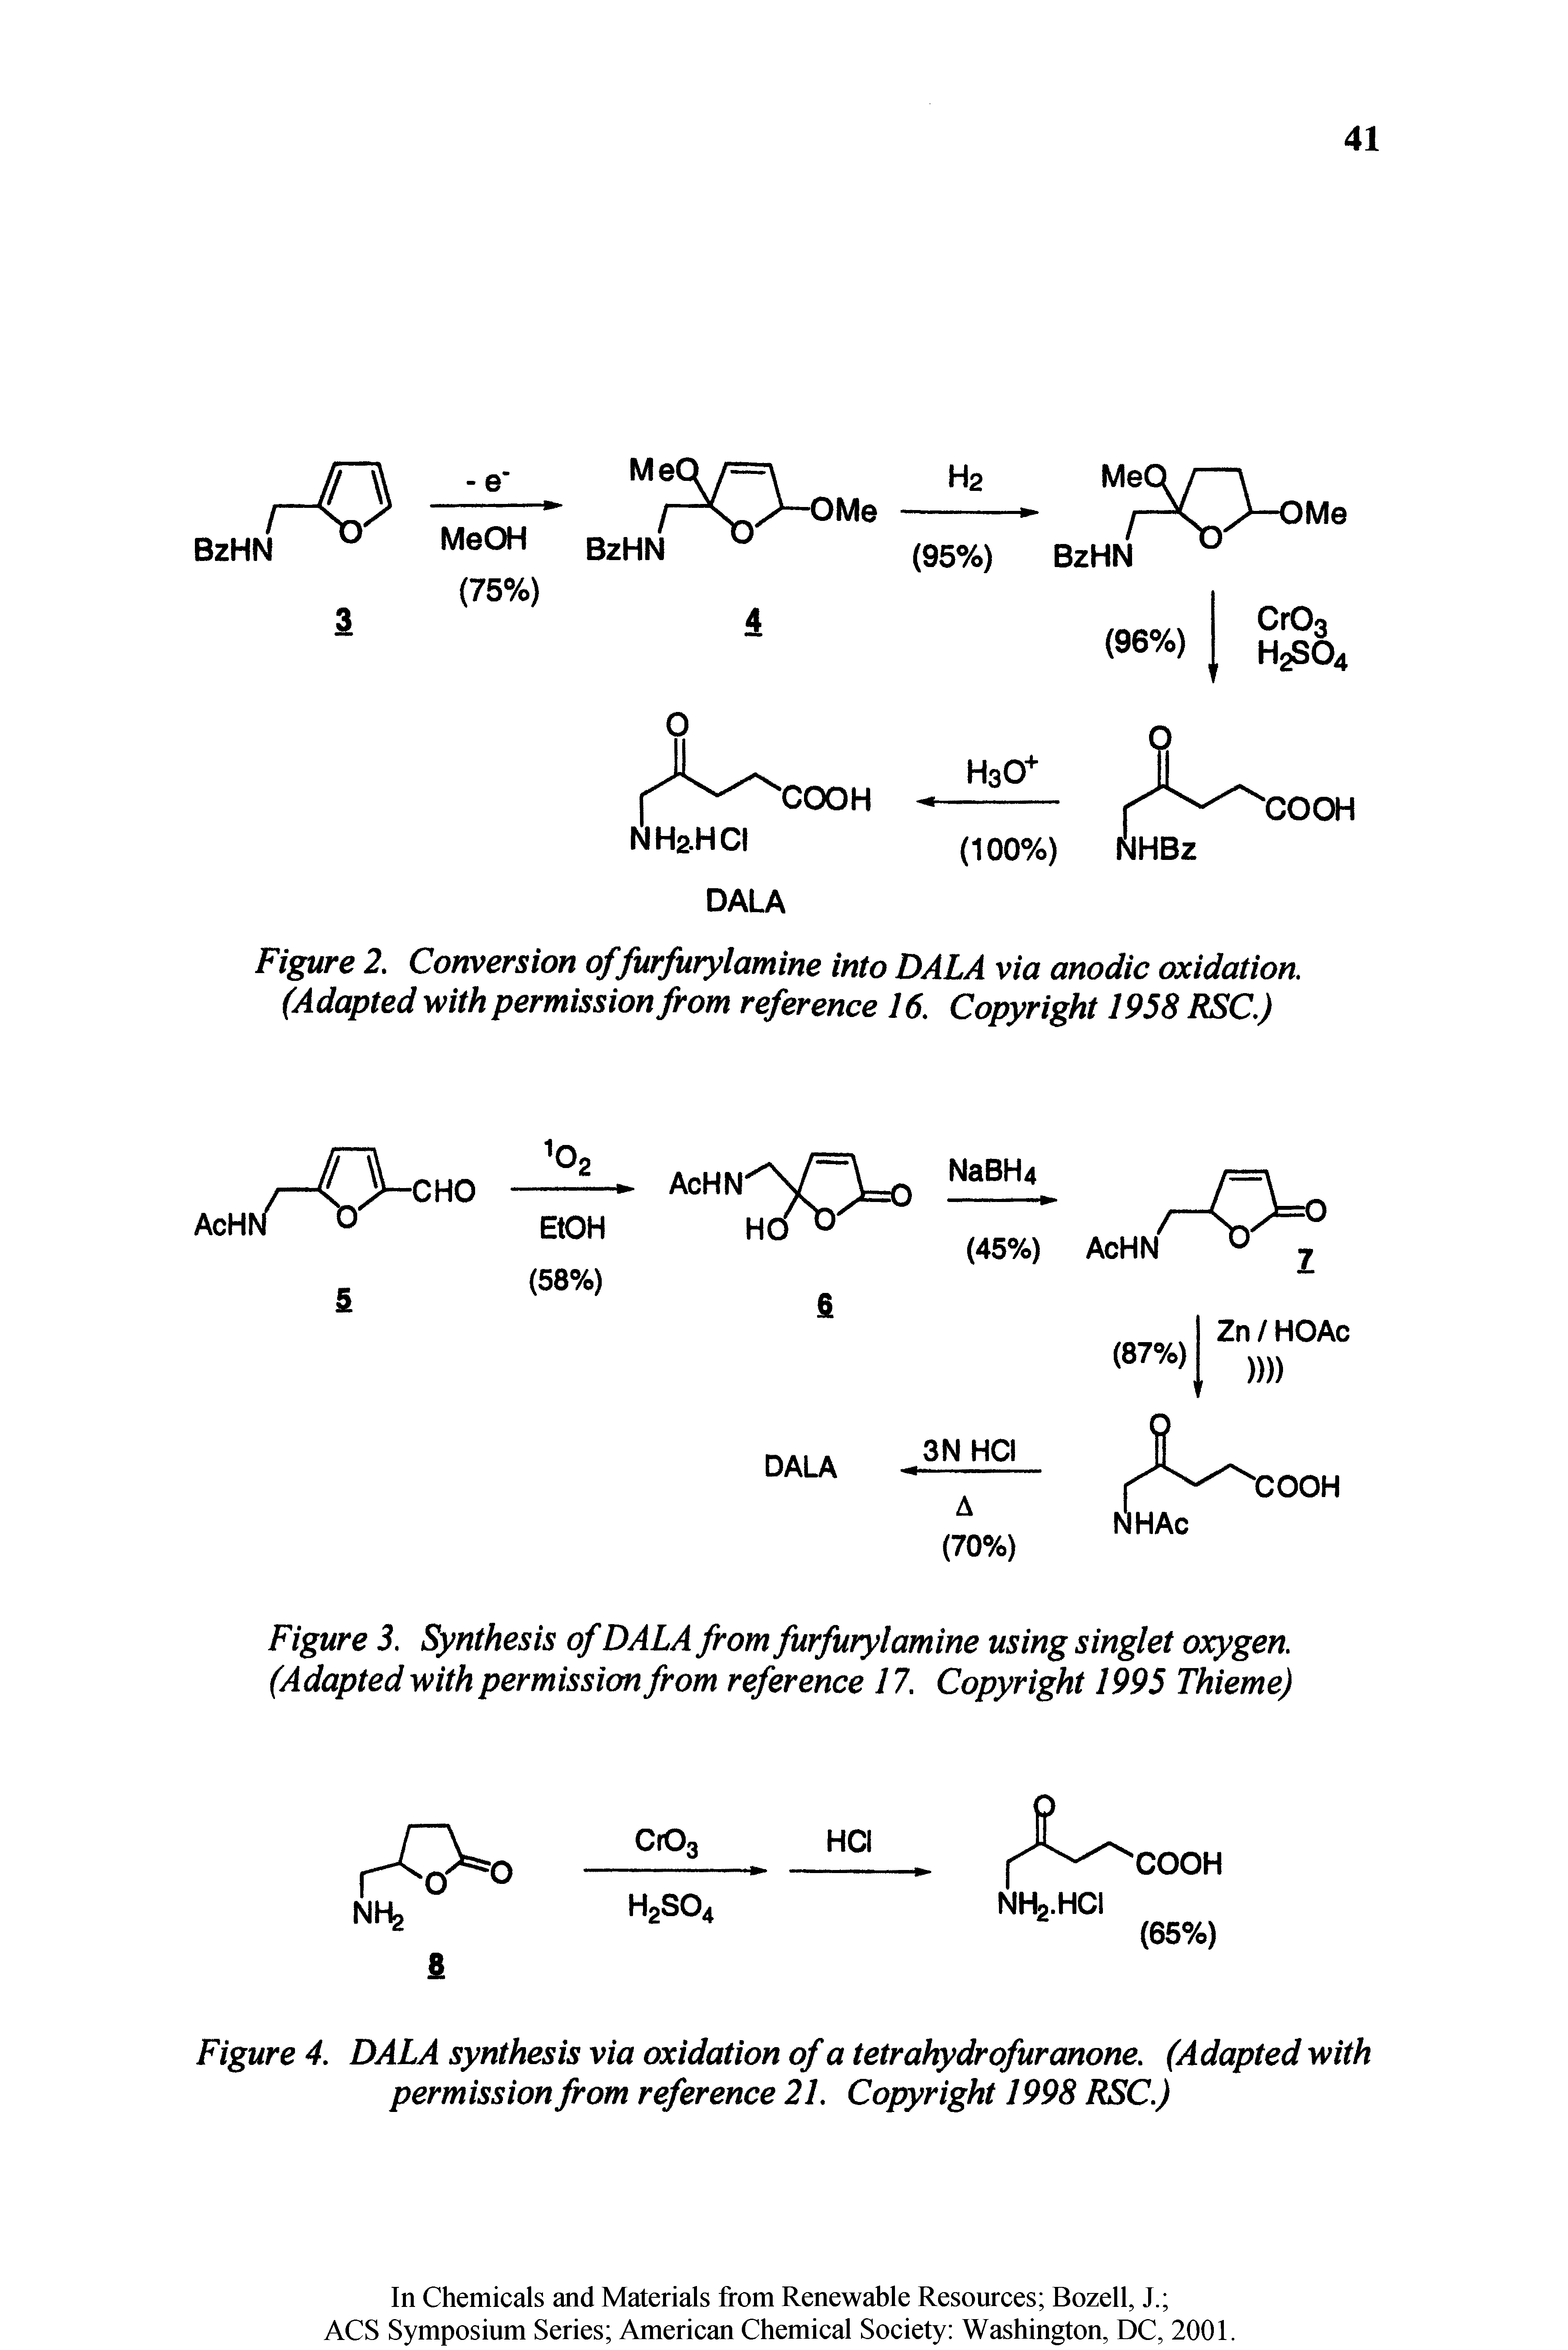 Figure 3. Synthesis of DALA from furfurylamine using singlet oxygen, (Adapted with permission from reference 17. Copyright 1995 Thieme)...